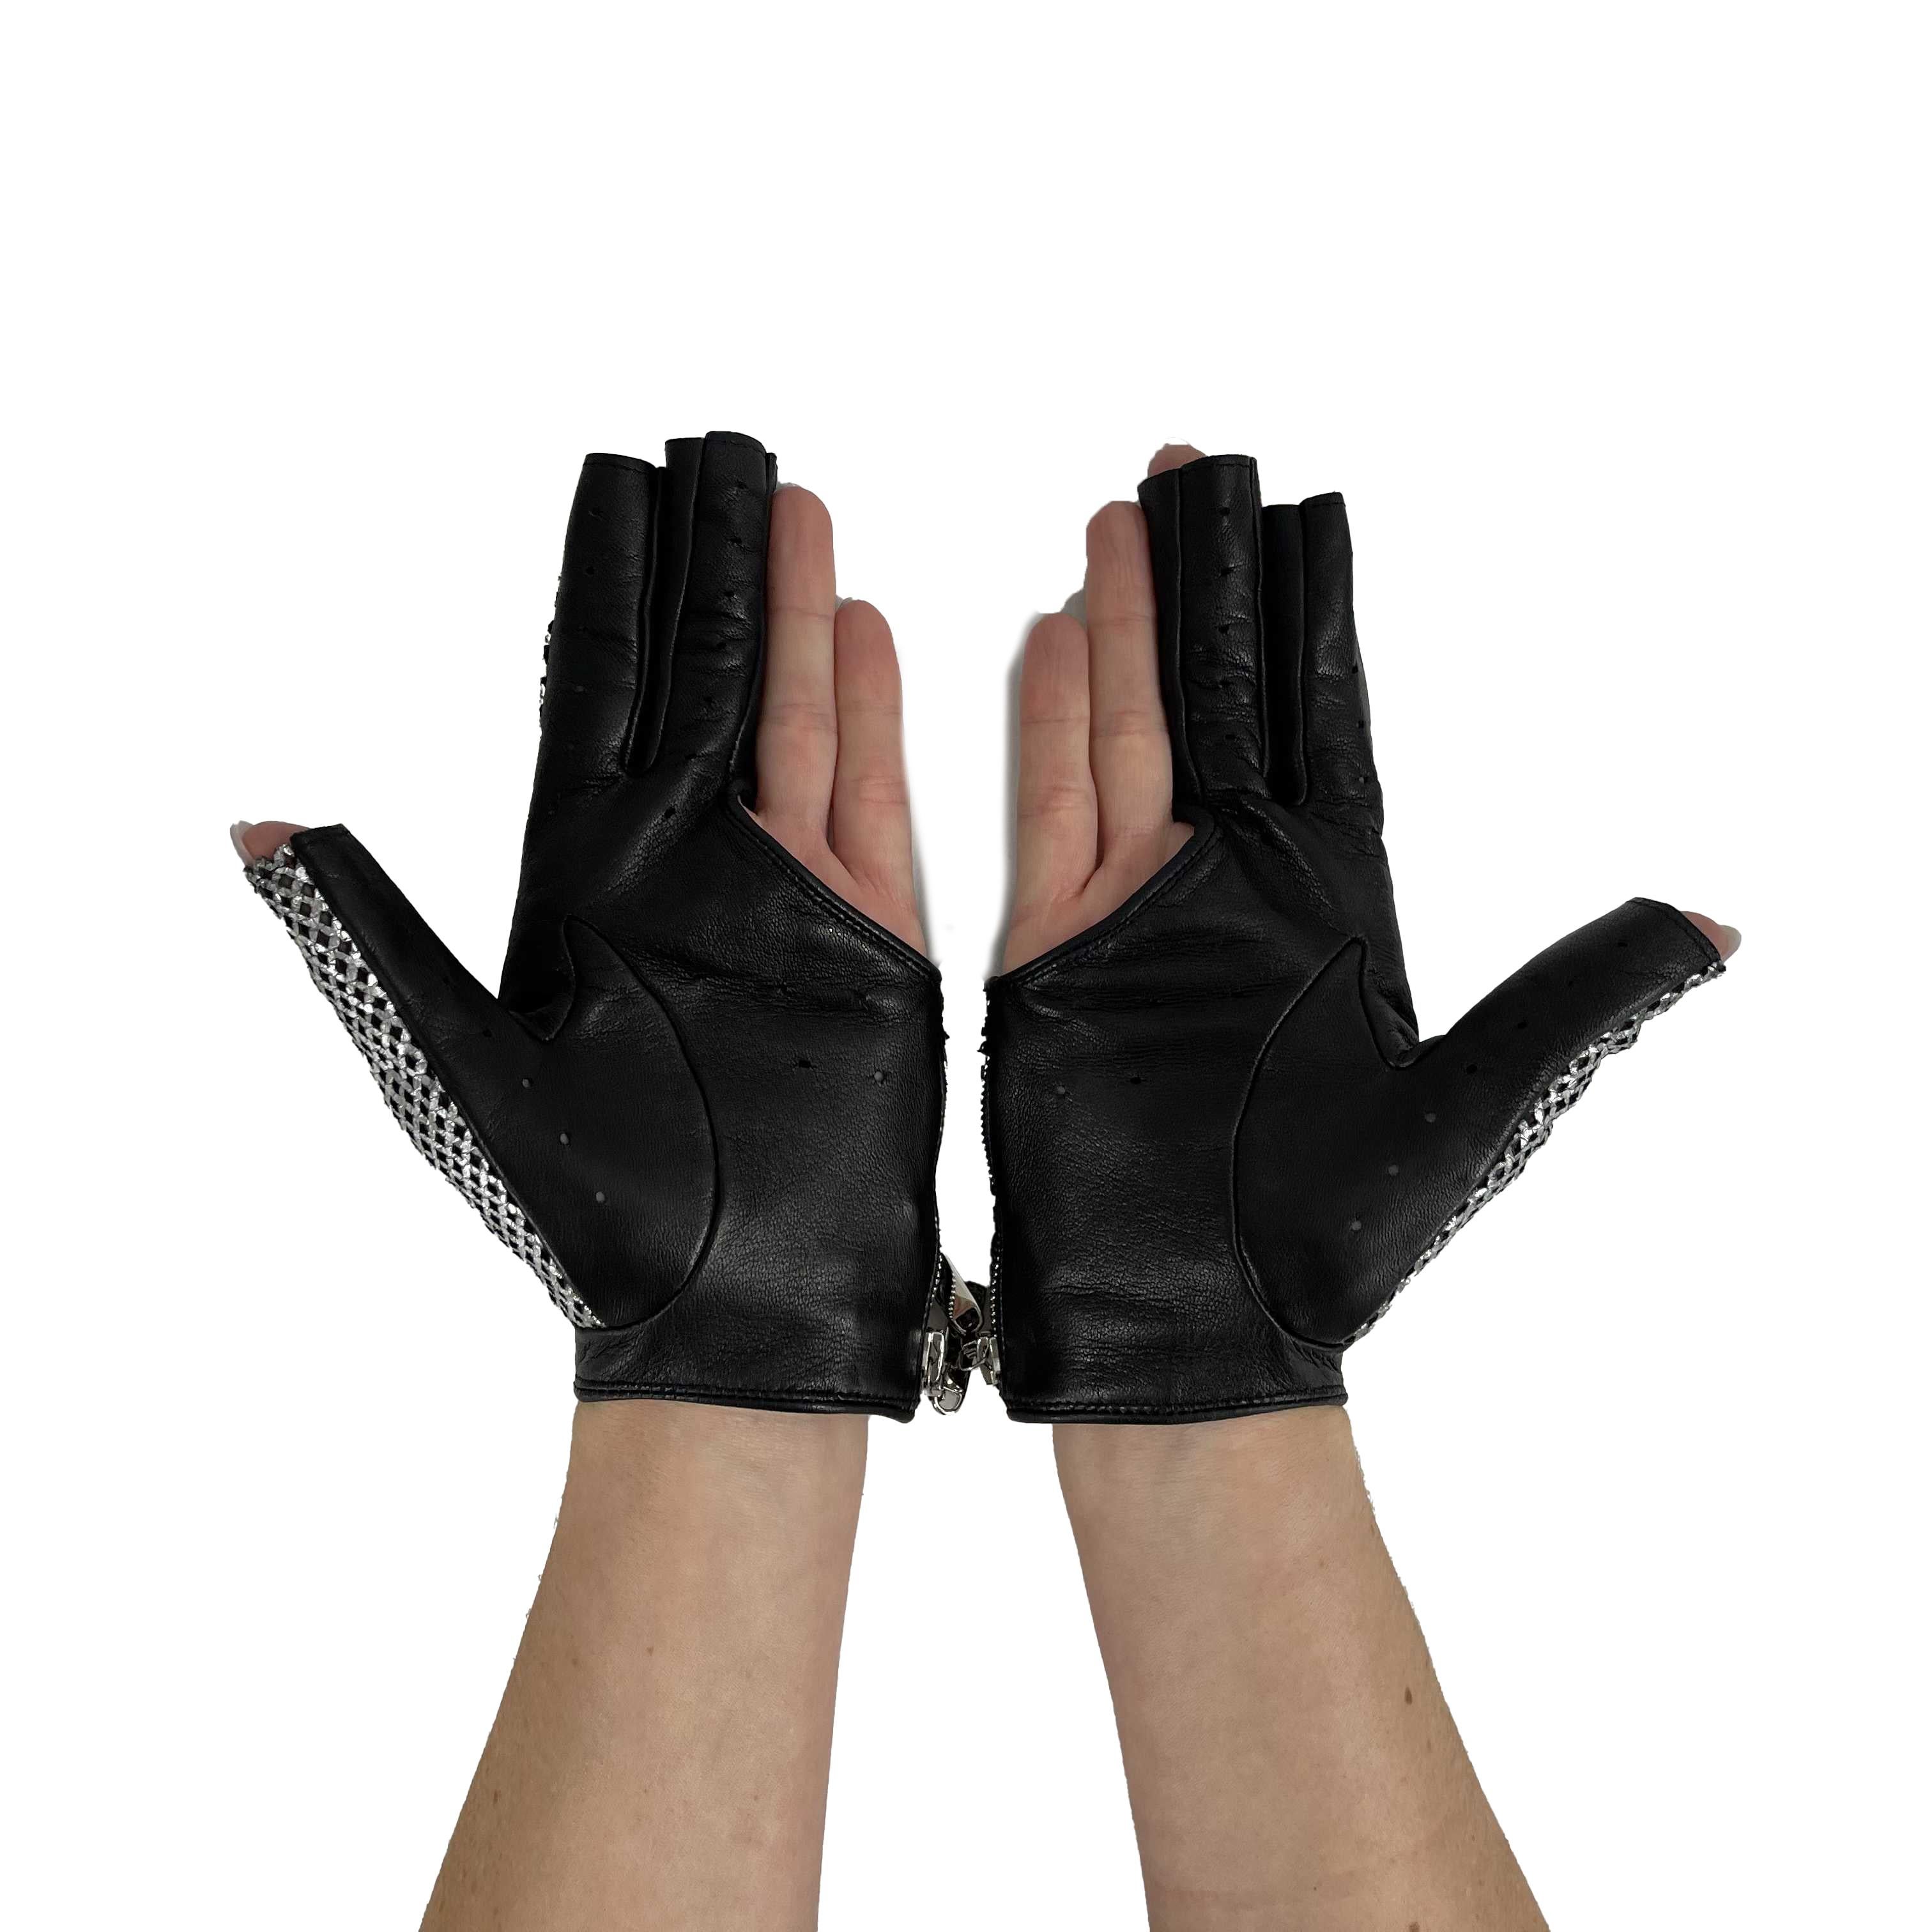 CHANEL 2008 Act 1 Black / Metallic Silver Mesh Leather Gloves 7.5 5